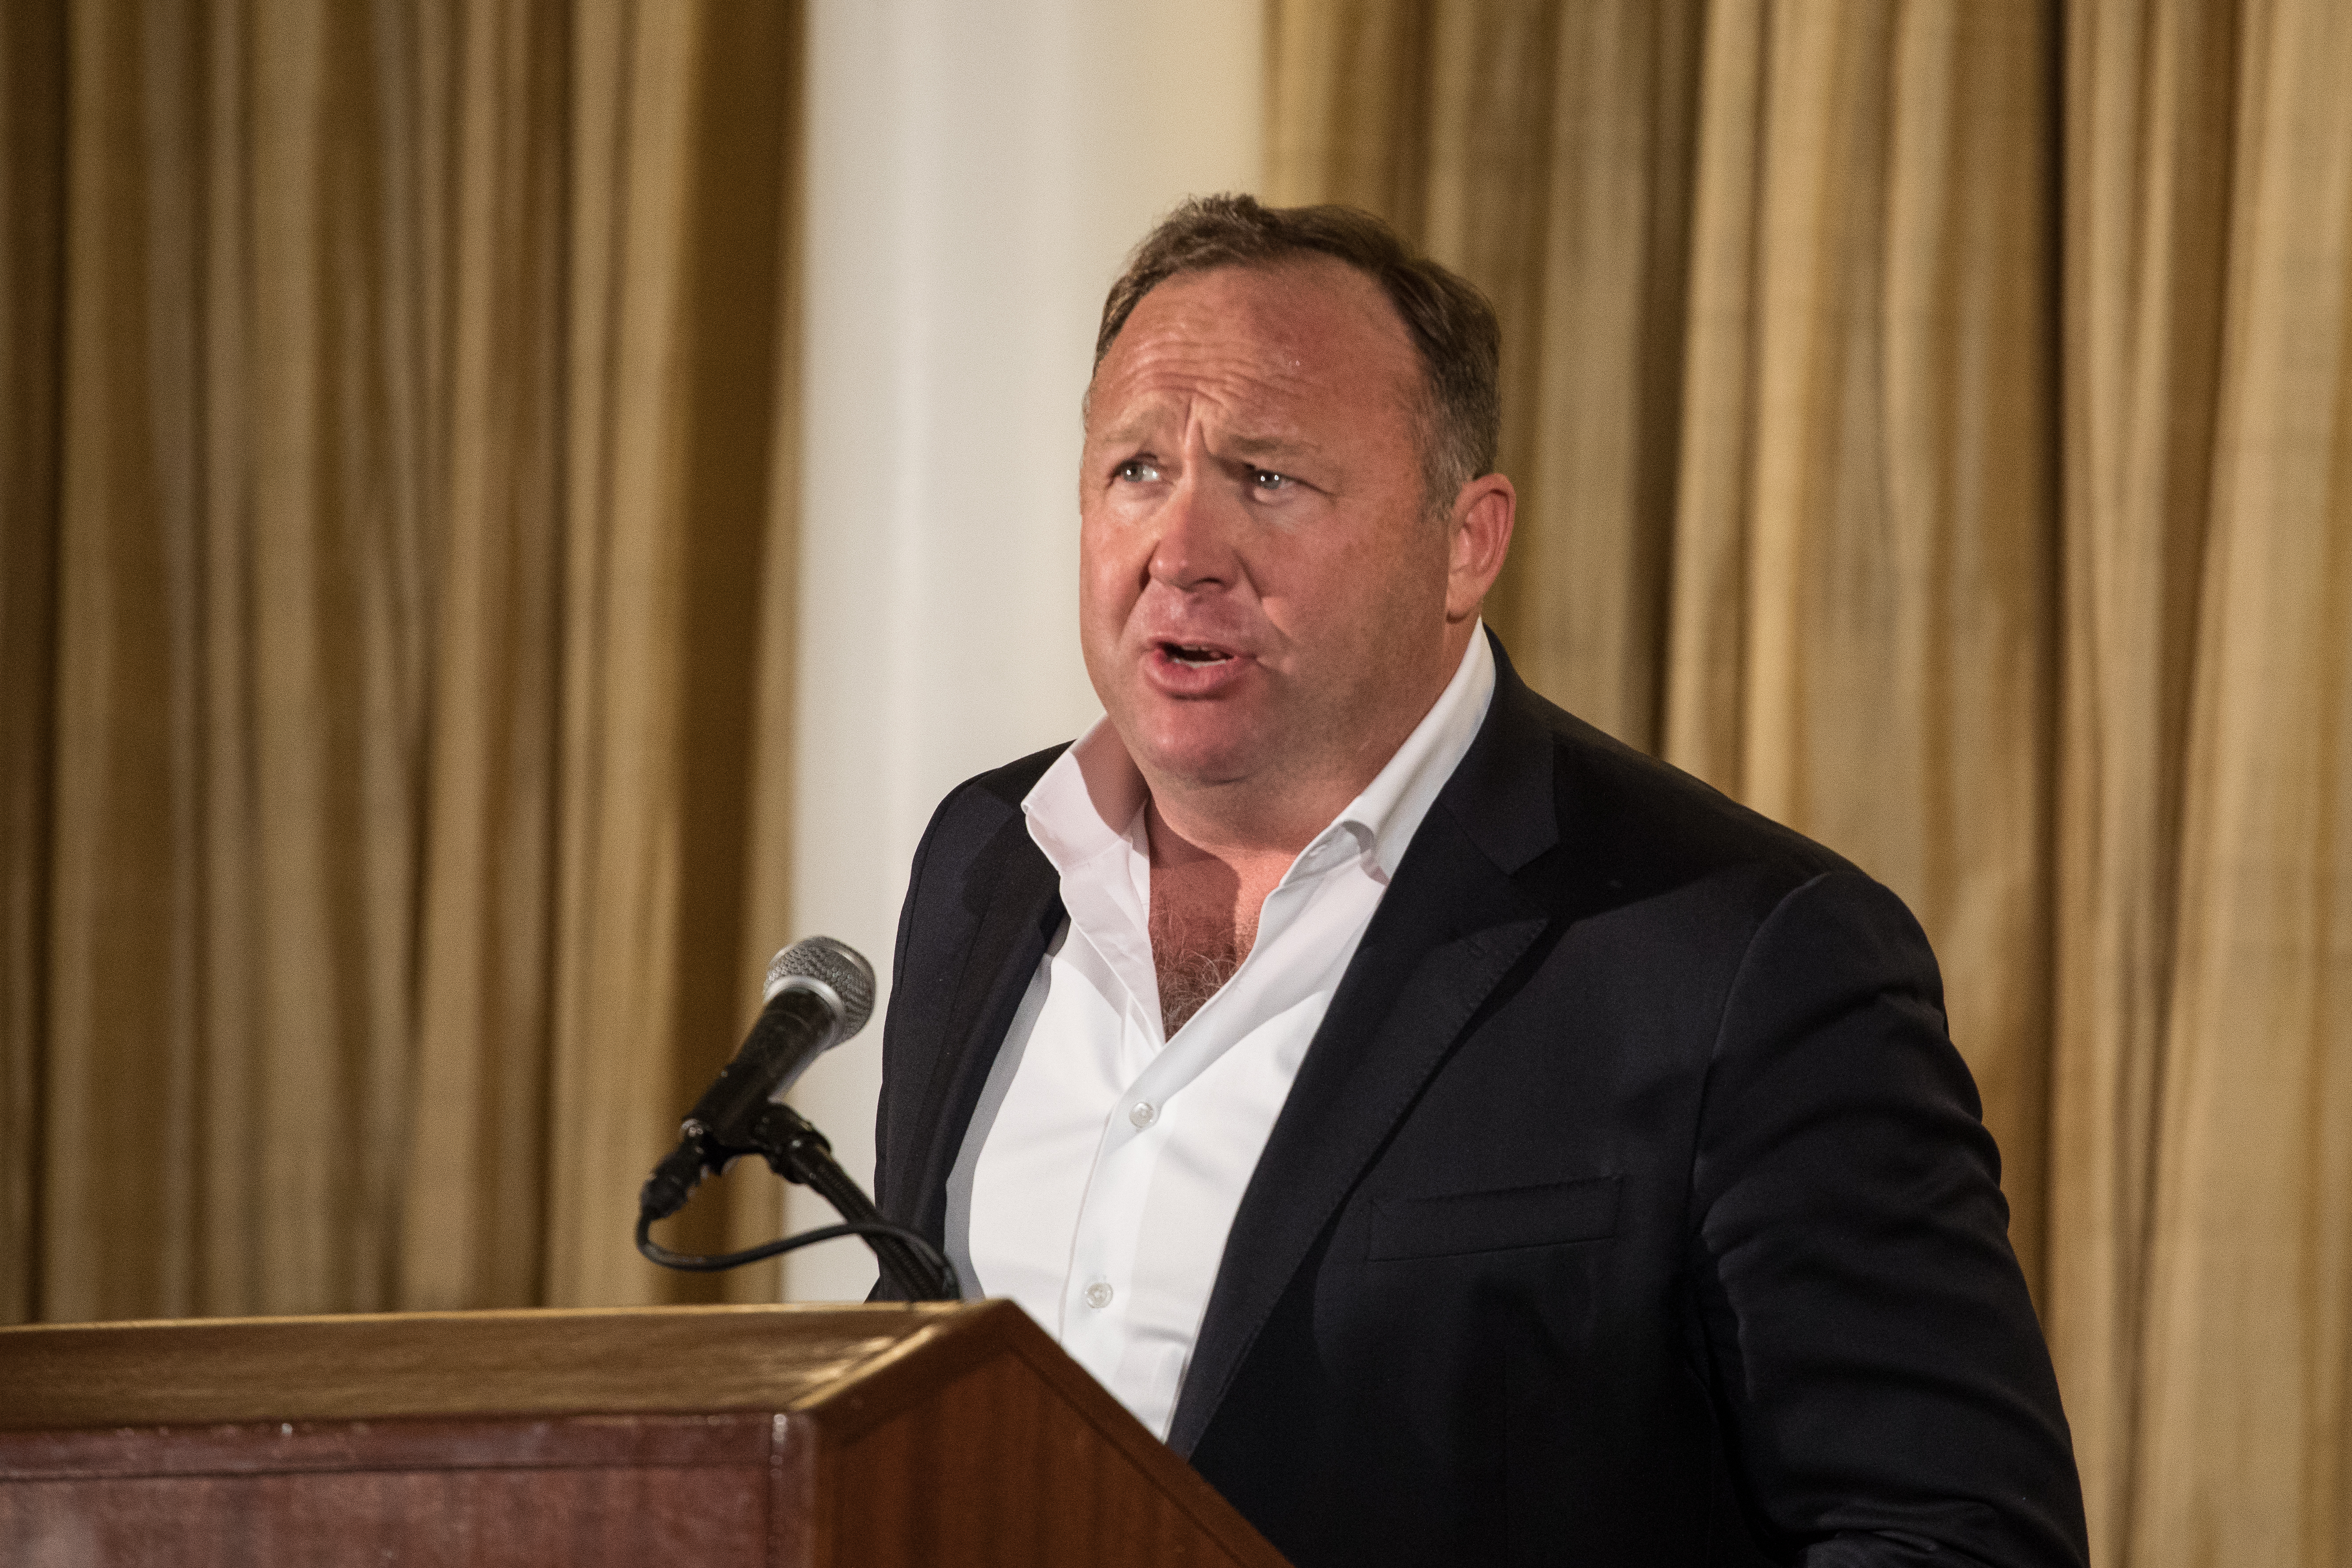 US conspiracy theorist Alex Jones ordered to pay nearly $1B in Sandy Hook defamation case